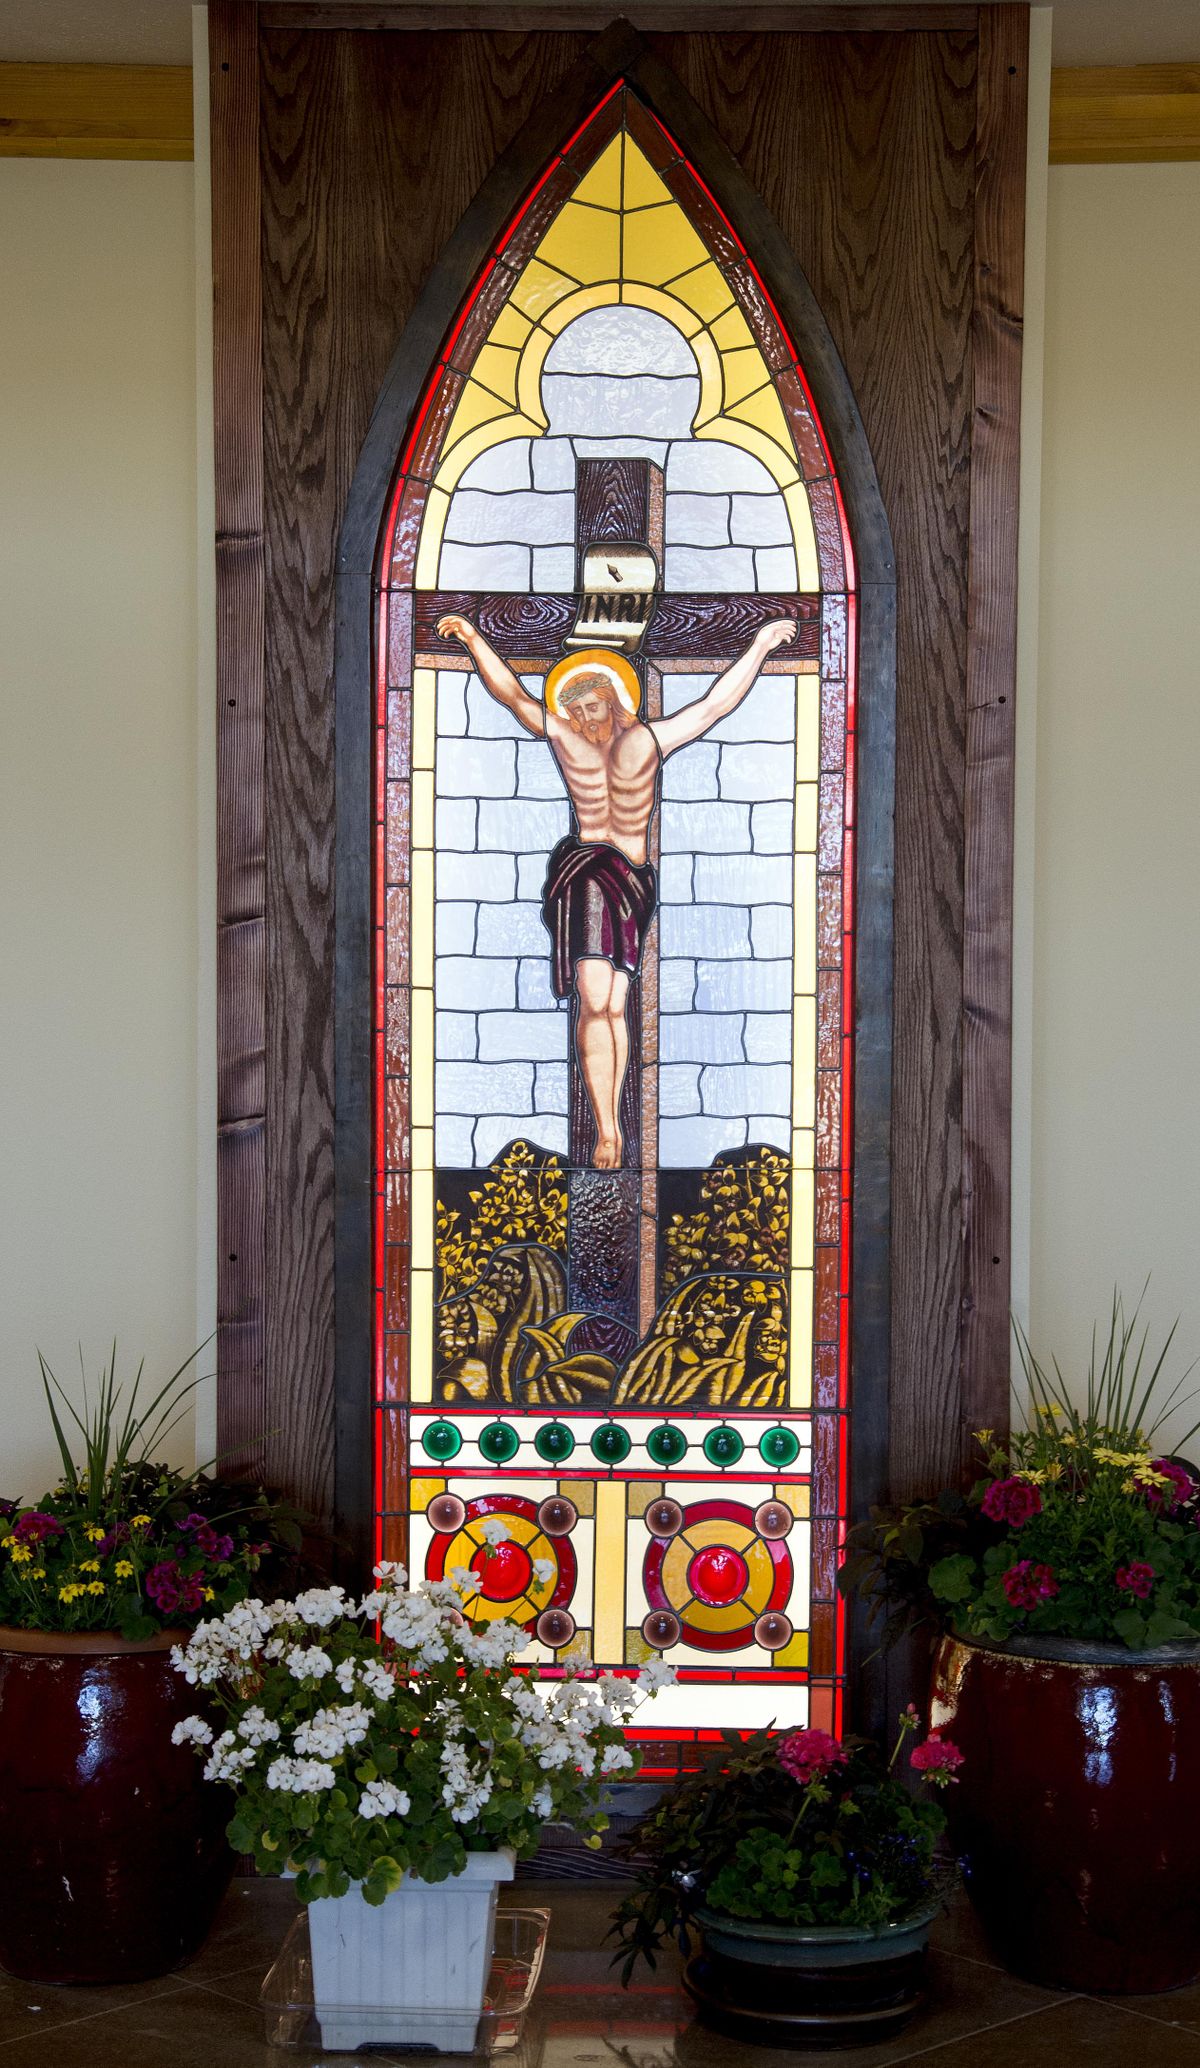 This  stained-glass window depicting the Crucifixion was donated to Our Lady of the Lake Catholic Church by Spokane artist Anthony Boccaccio, who salvaged it from a closed Catholic church in Chittenango, N.Y.  in 1973. The window’s 43-year journey to the small church in Suncrest is filled with coincidence and mystery. (Colin Mulvany / The Spokesman-Review)